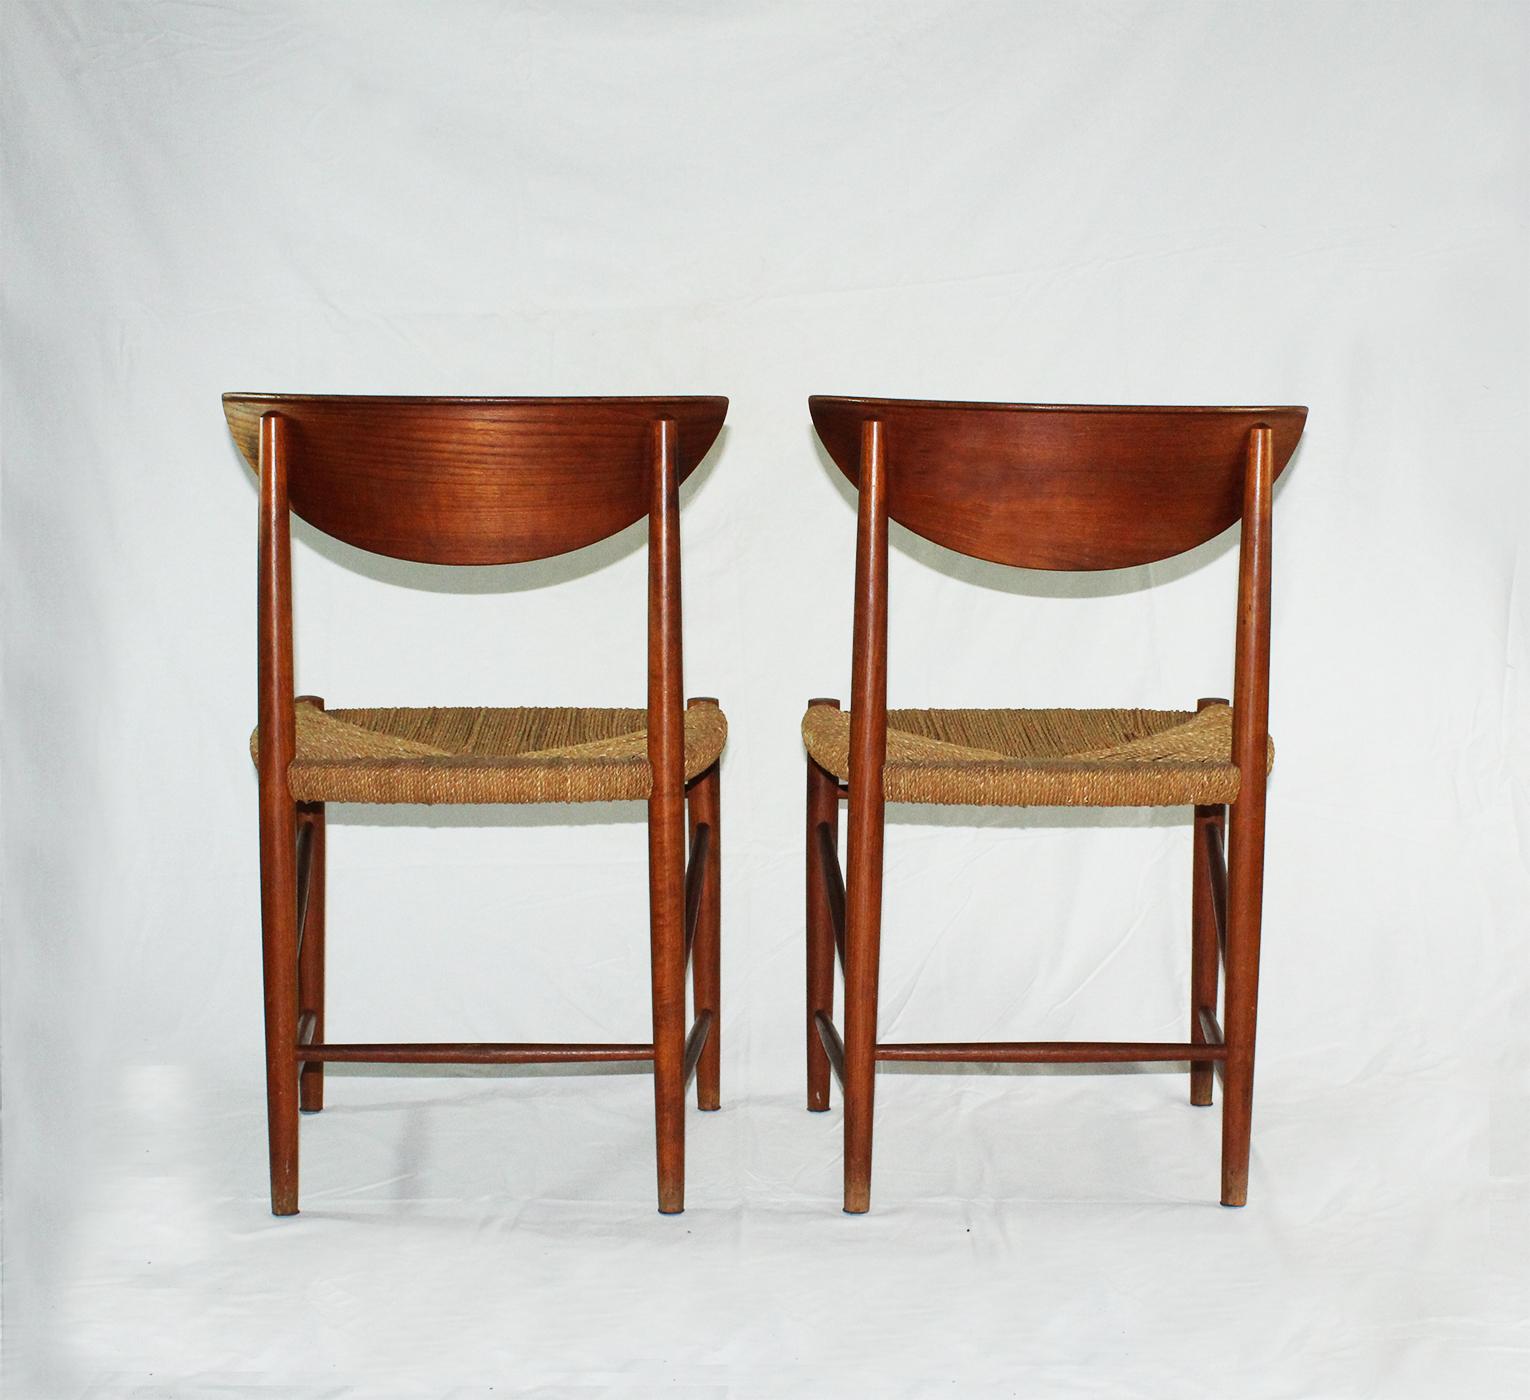 Set of two midcentury Danish dining chairs in teak and papercord designed by Peter Hvidt and Orla Mølgaard Nielsen for Søborg Møbelfabrik, model 316 in the 1950s. Papercord and frame are original. Good vintage Scandinavian chairs.